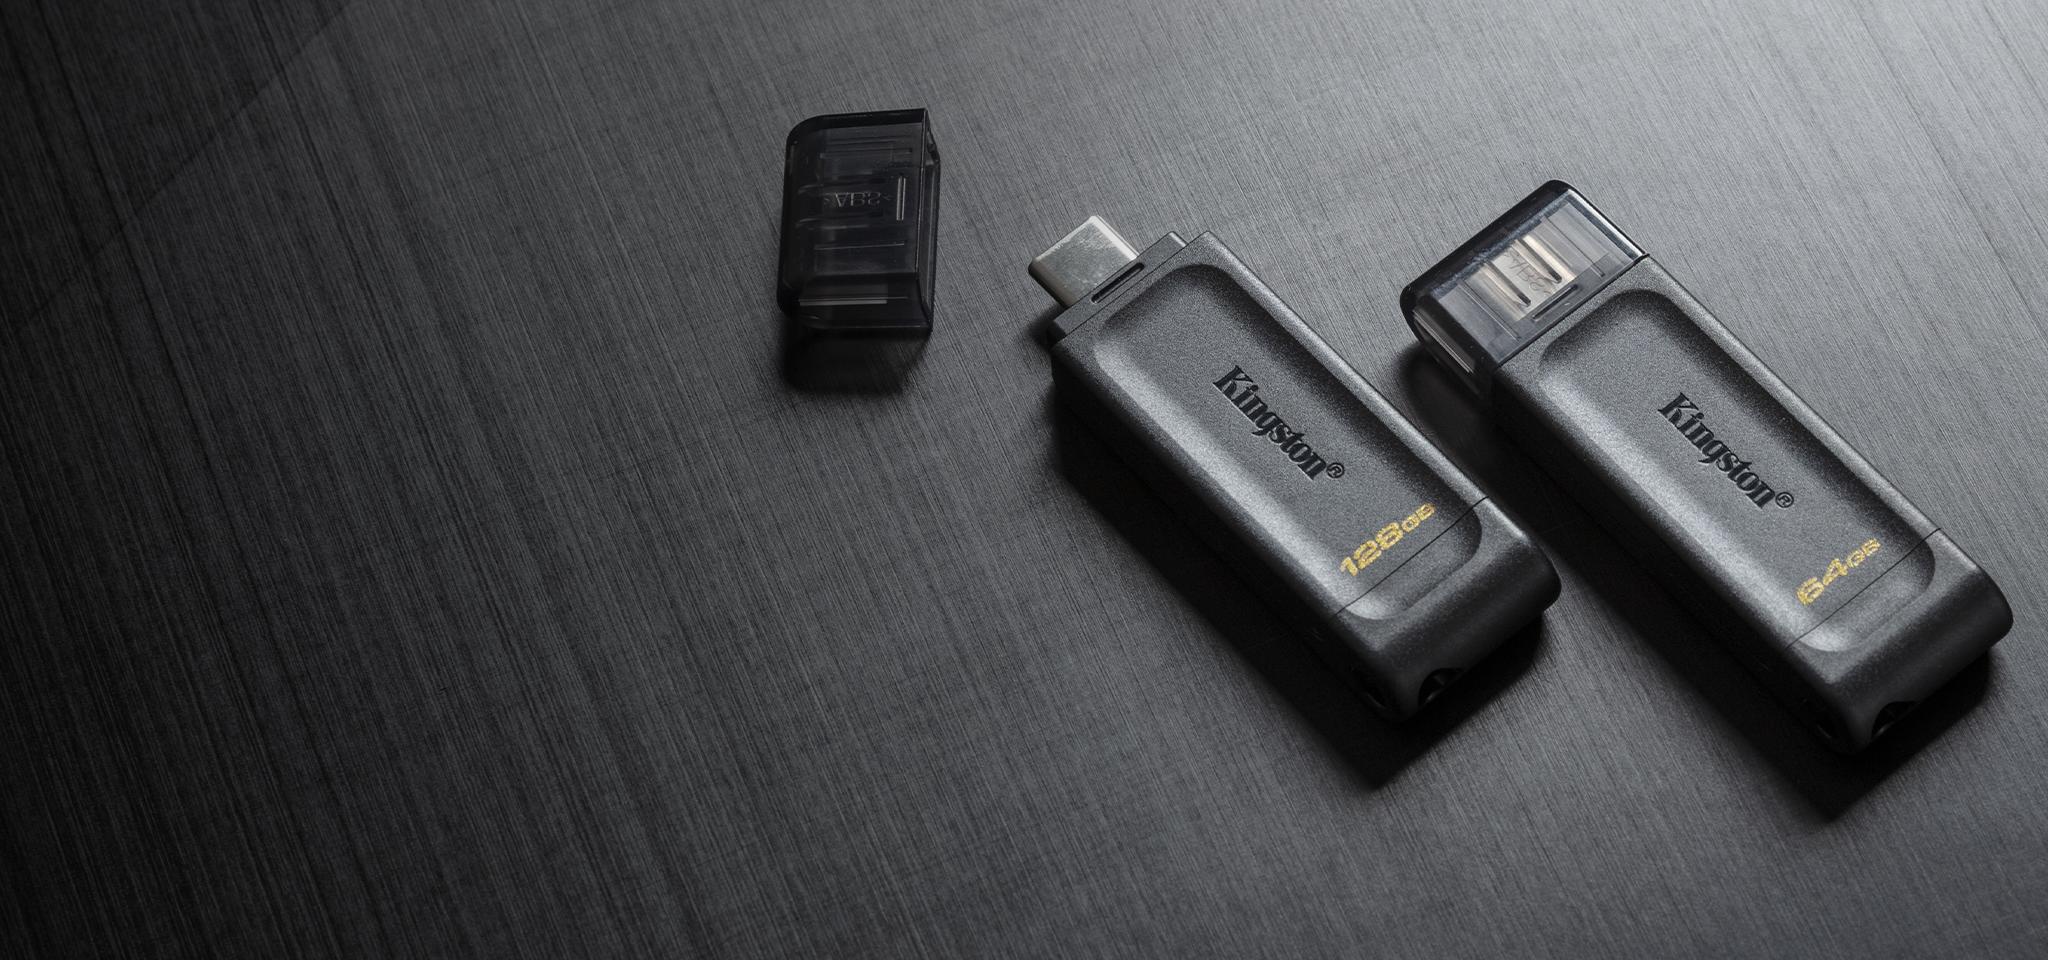 A pair of DT70 USB flash drives sit on a textile surface